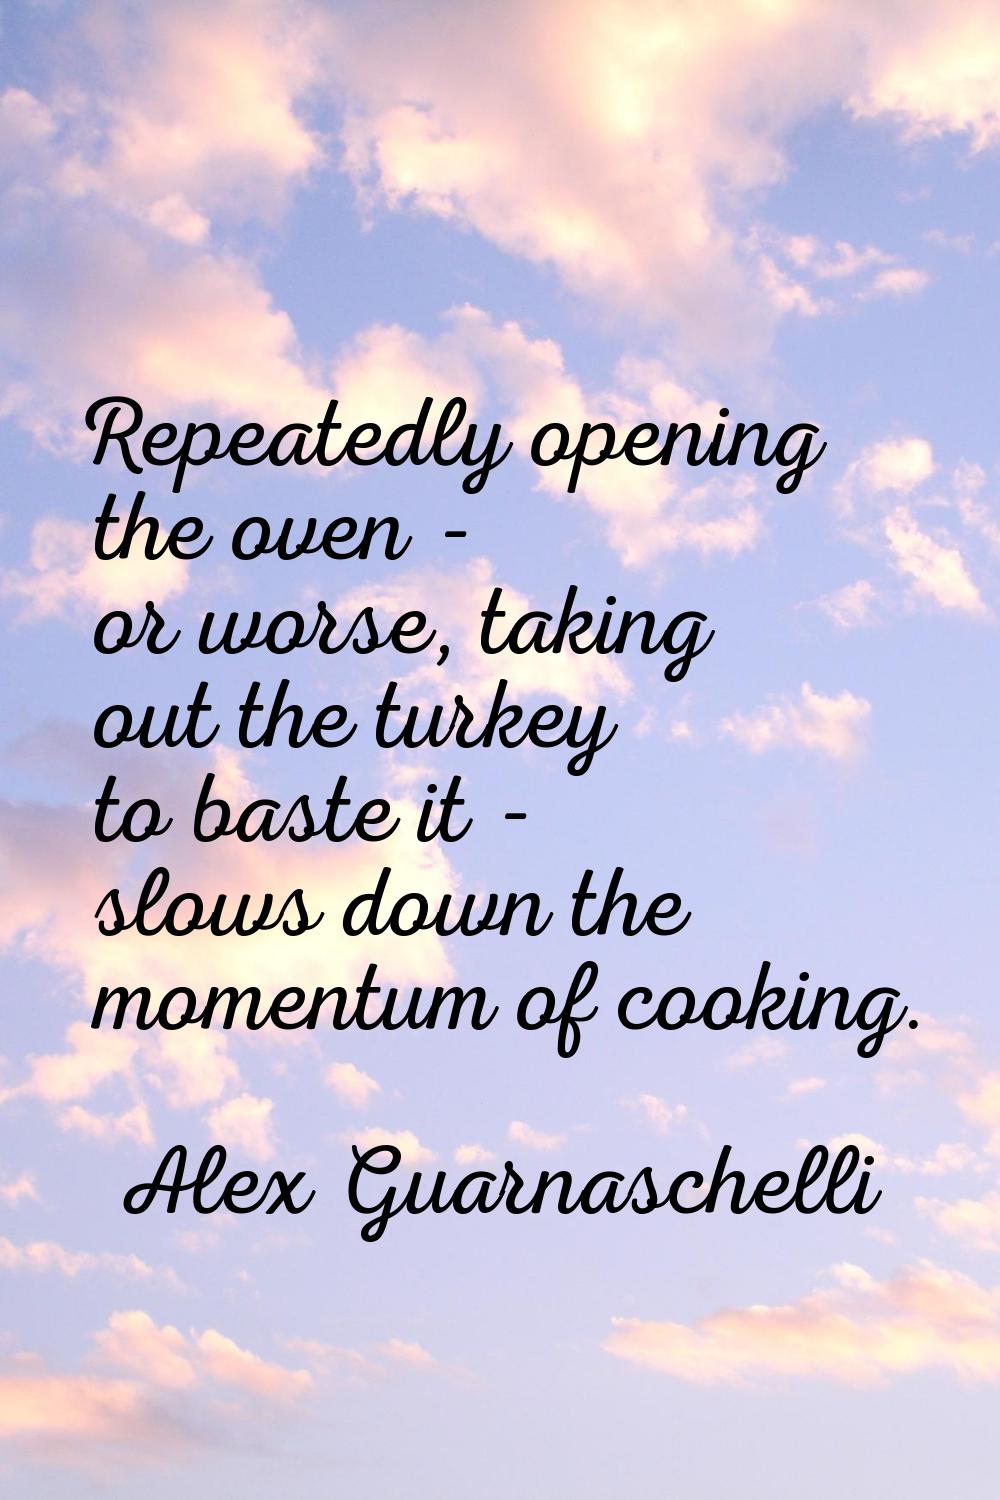 Repeatedly opening the oven - or worse, taking out the turkey to baste it - slows down the momentum